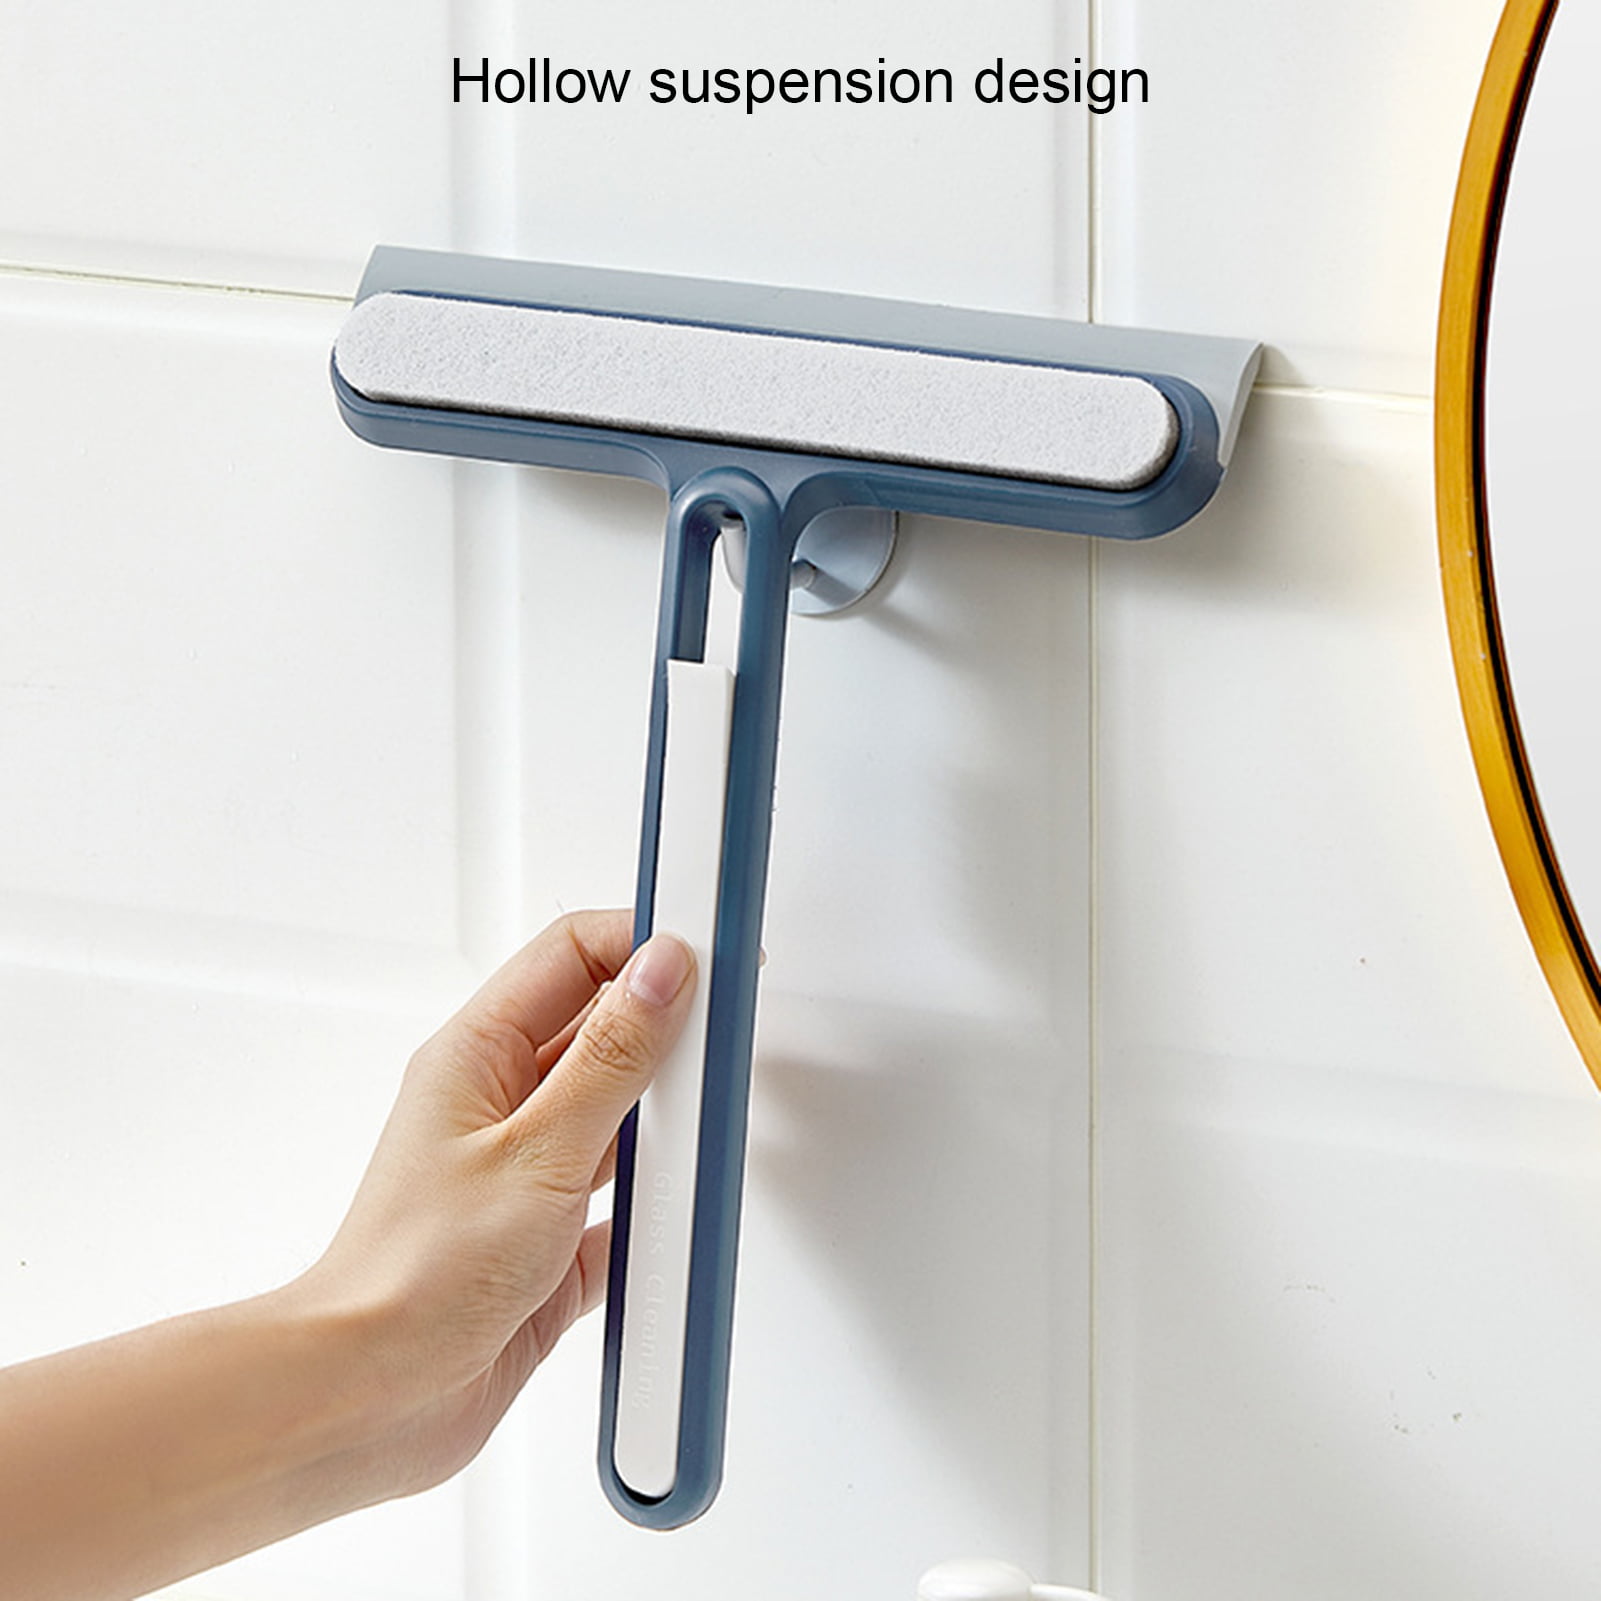 LA TALUS Window Cleaning Brush Multifunctional Double-sided Long Handle  Labor-saving with Water Spray Bottle Glass Wiper Sponge Brush Head Window  Mirror Squeegee Wiper for Home Sky Blue 